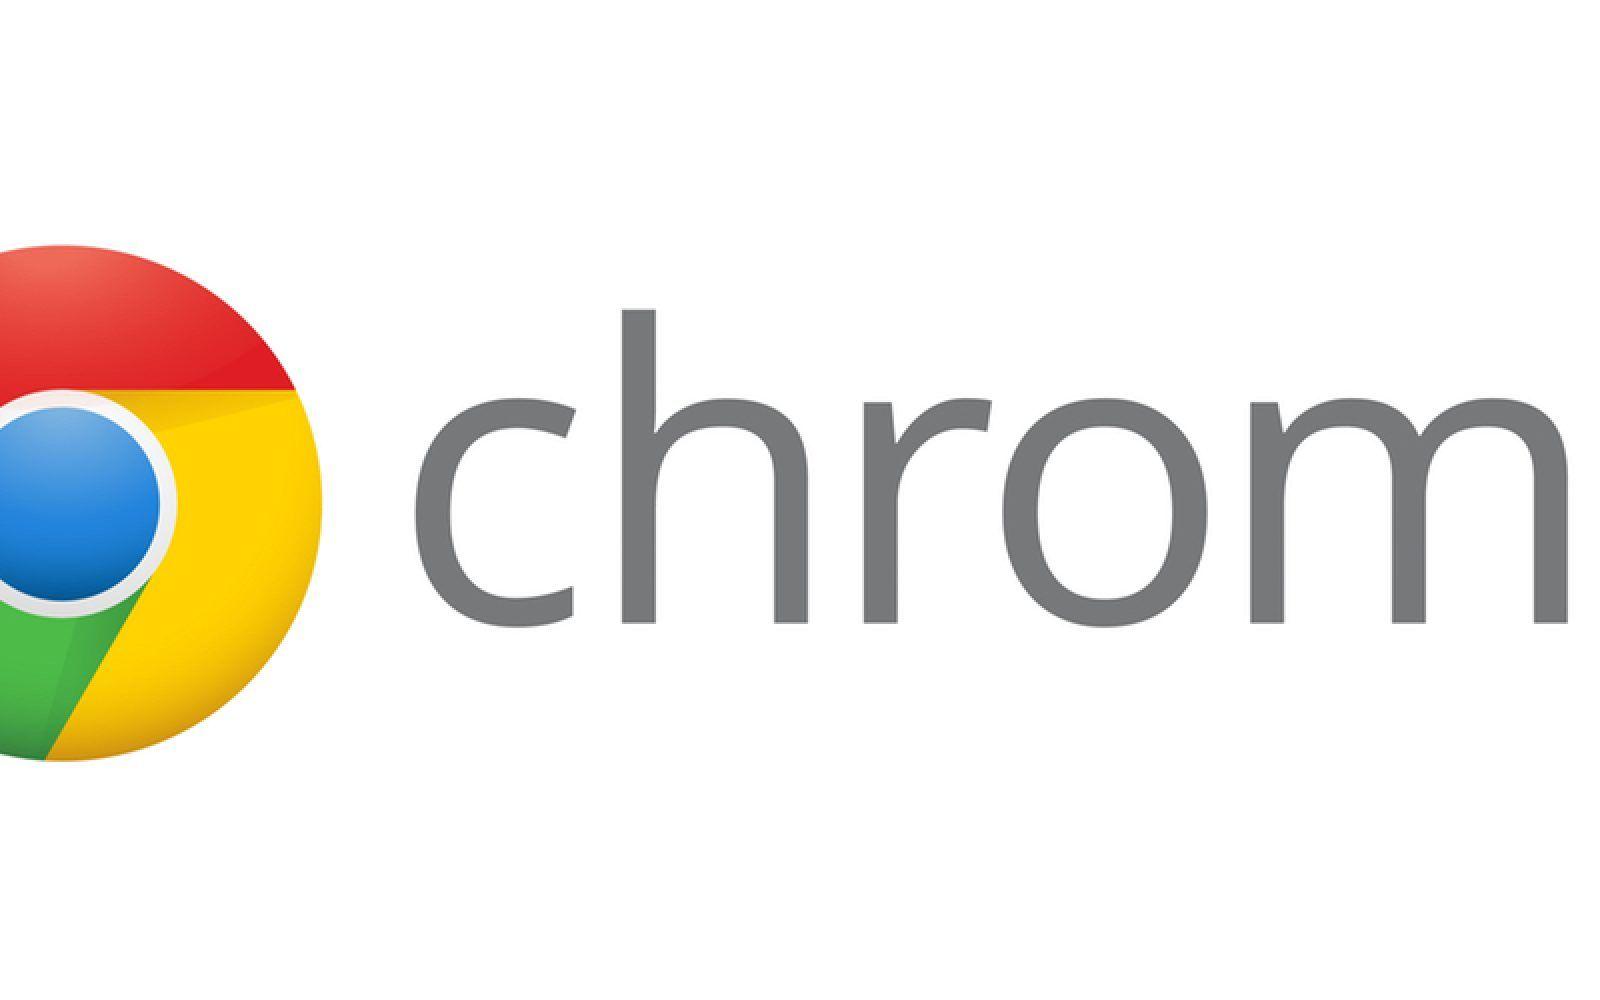 Chrome Mac Logo - Google Chrome leaves OS X cats out in the cold - 9to5Mac